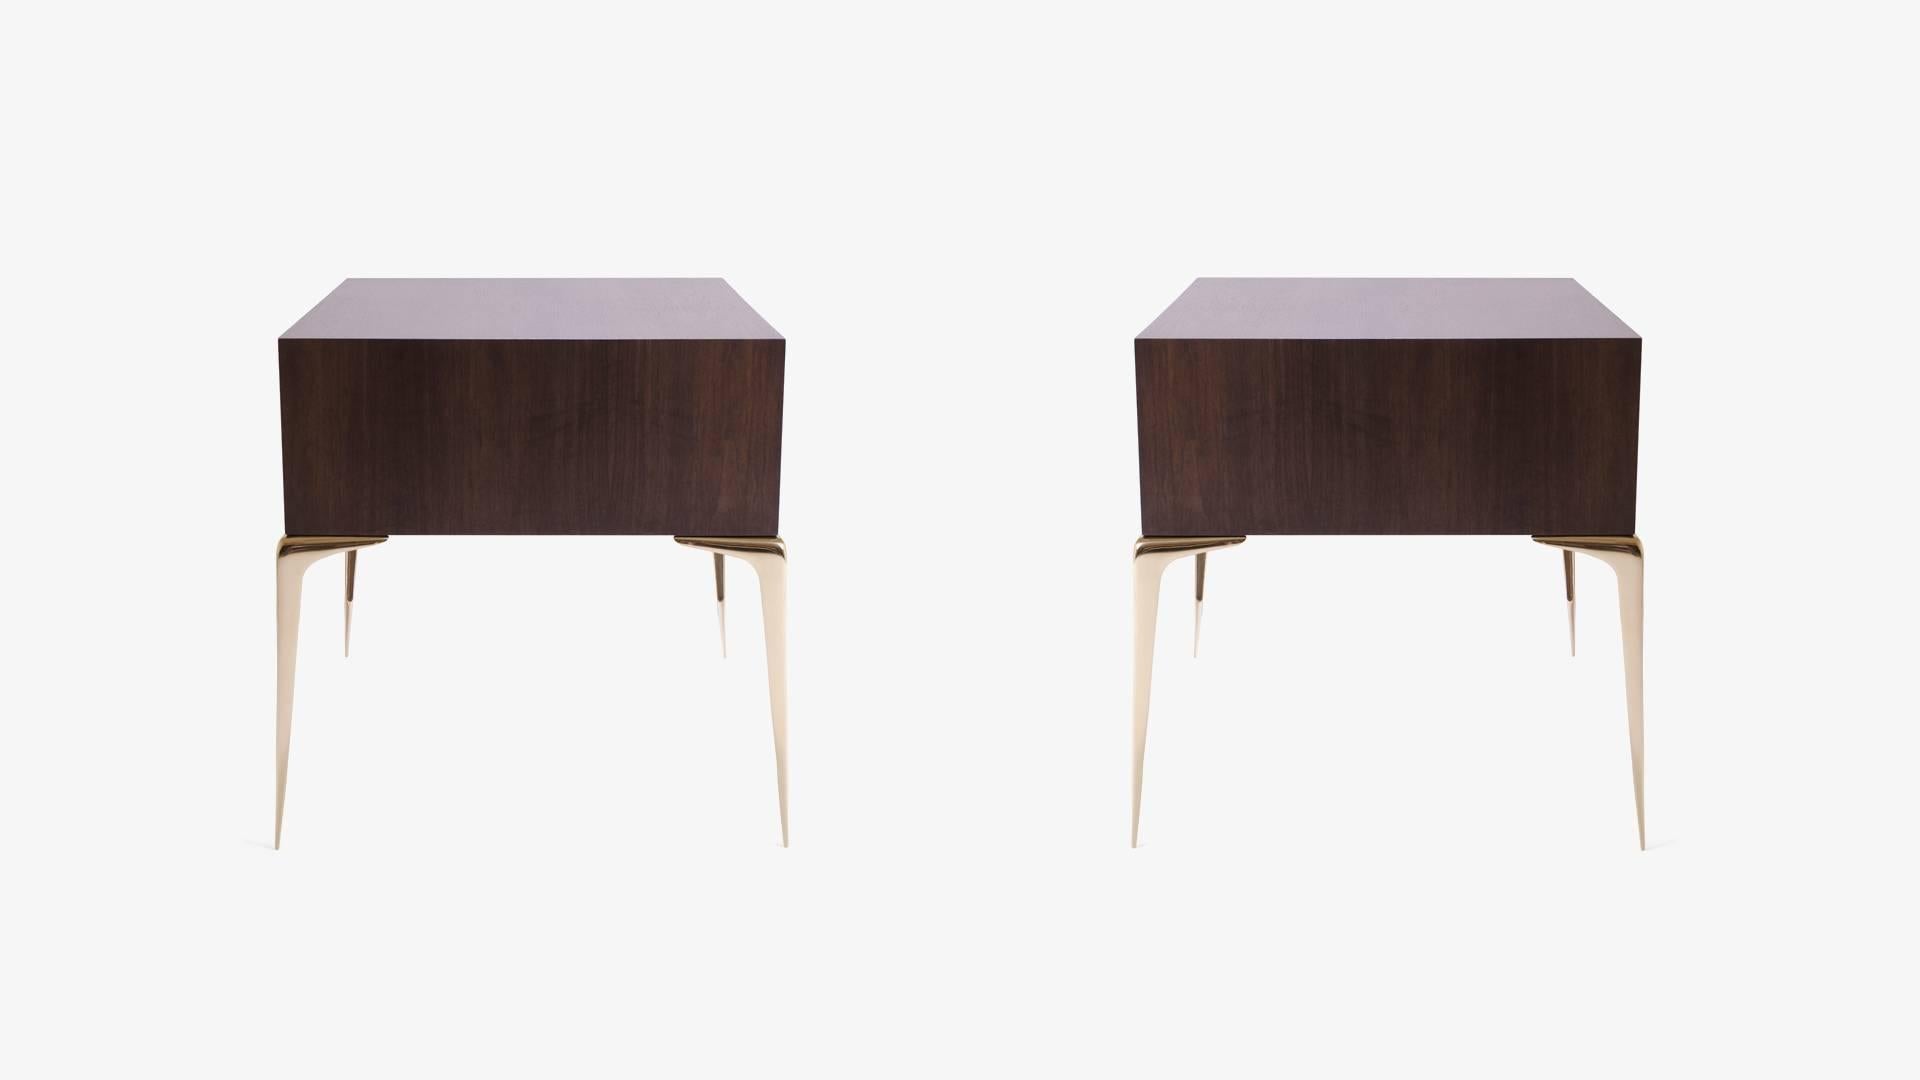 Mid-Century Modern Colette Brass Nightstands in Ebony and Ivory by Montage, Pair